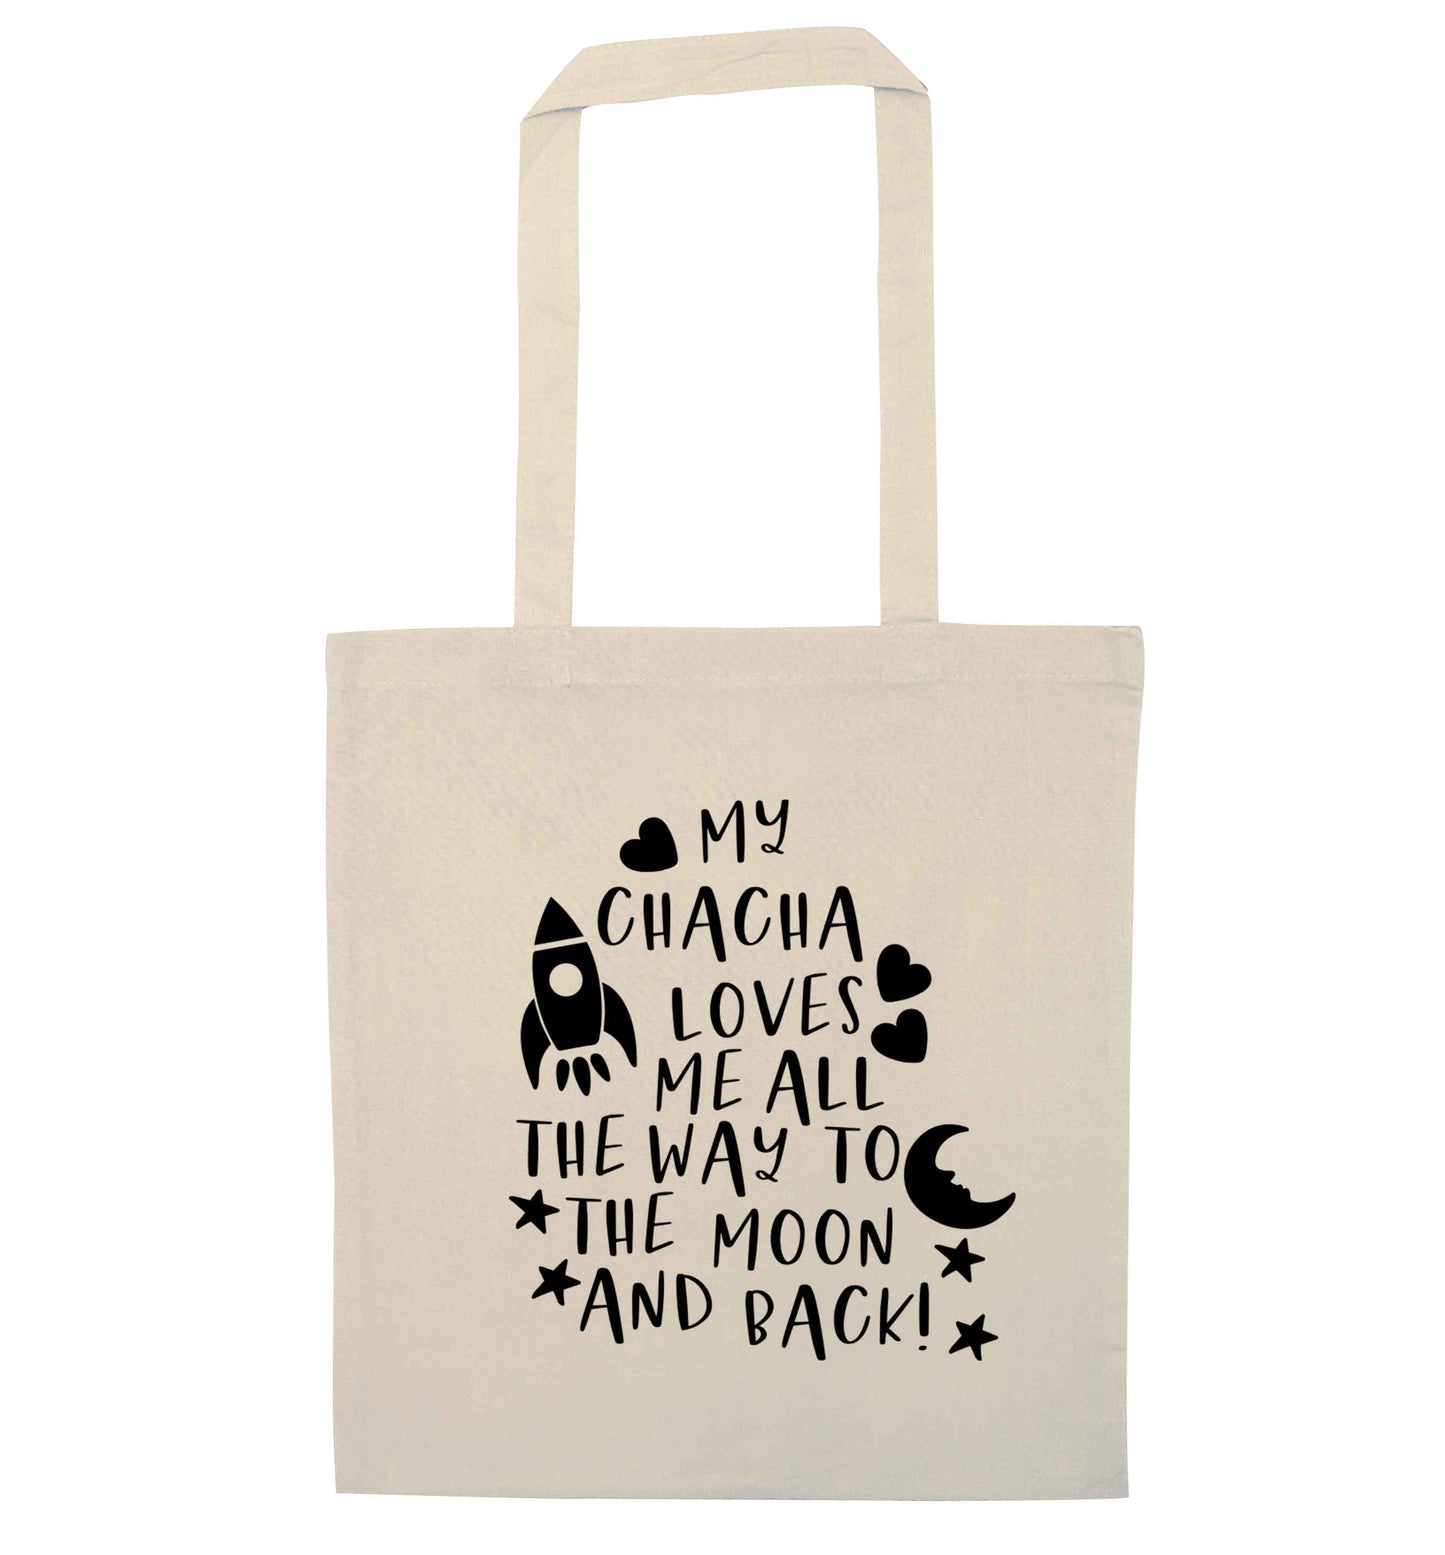 My chacha loves me all the way to the moon and back natural tote bag